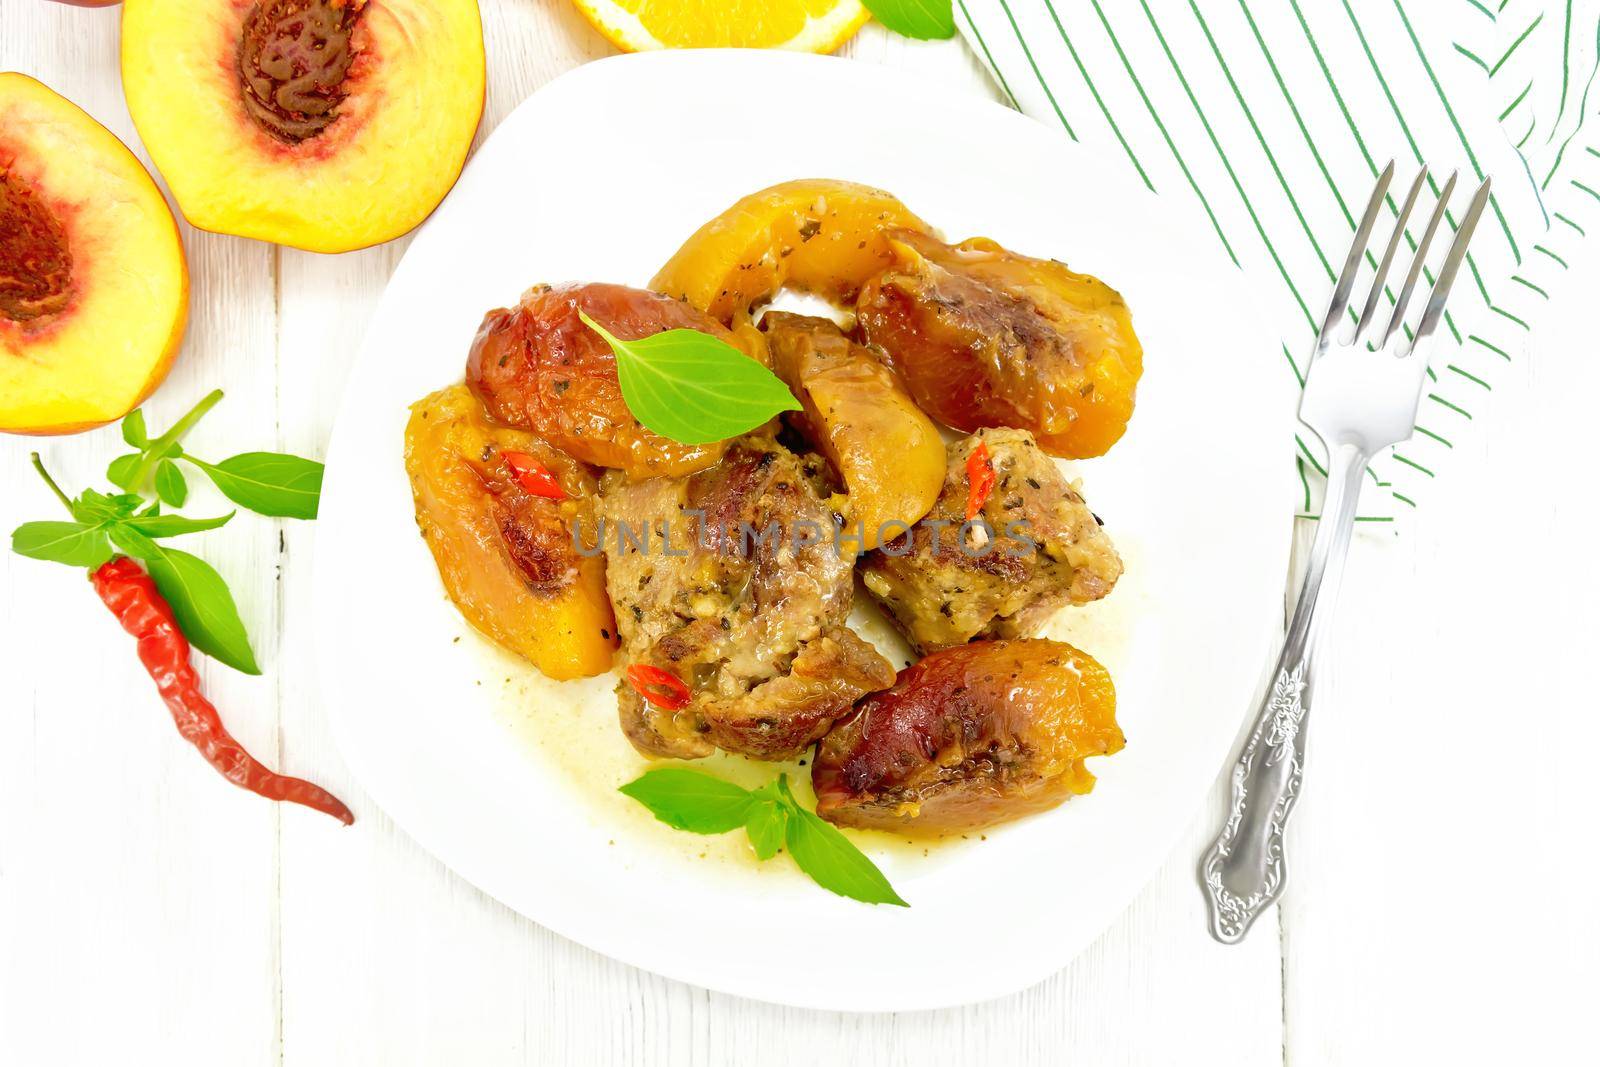 Turkey stewed with peaches, fresh hot pepper and orange sauce, basil leaves in a plate, napkin, fruits on wooden board background from above